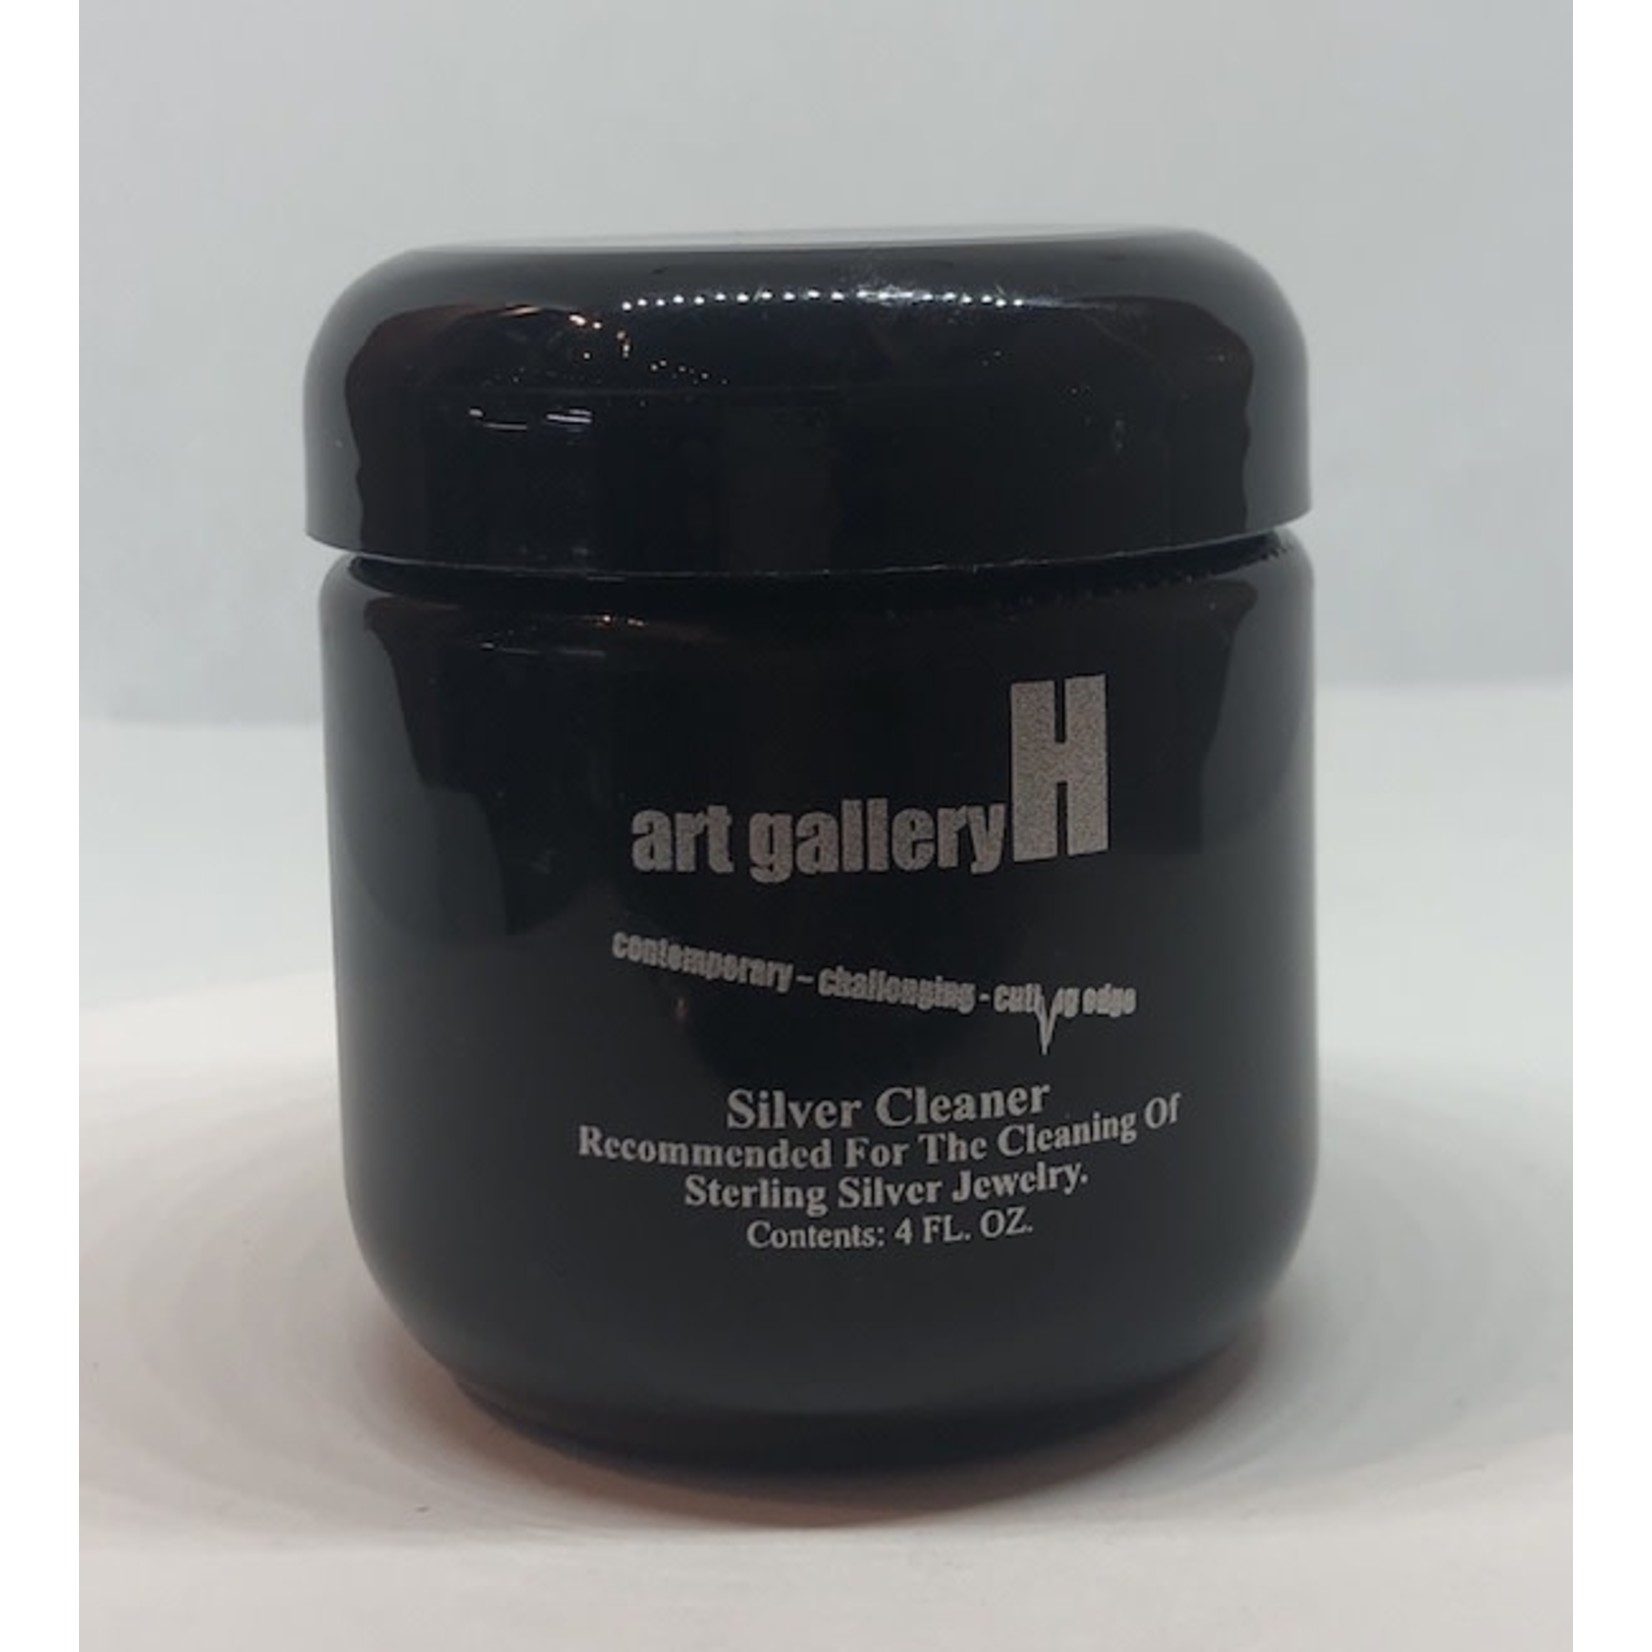 Silver Jewelry Cleaner - 4oz - Art Gallery H